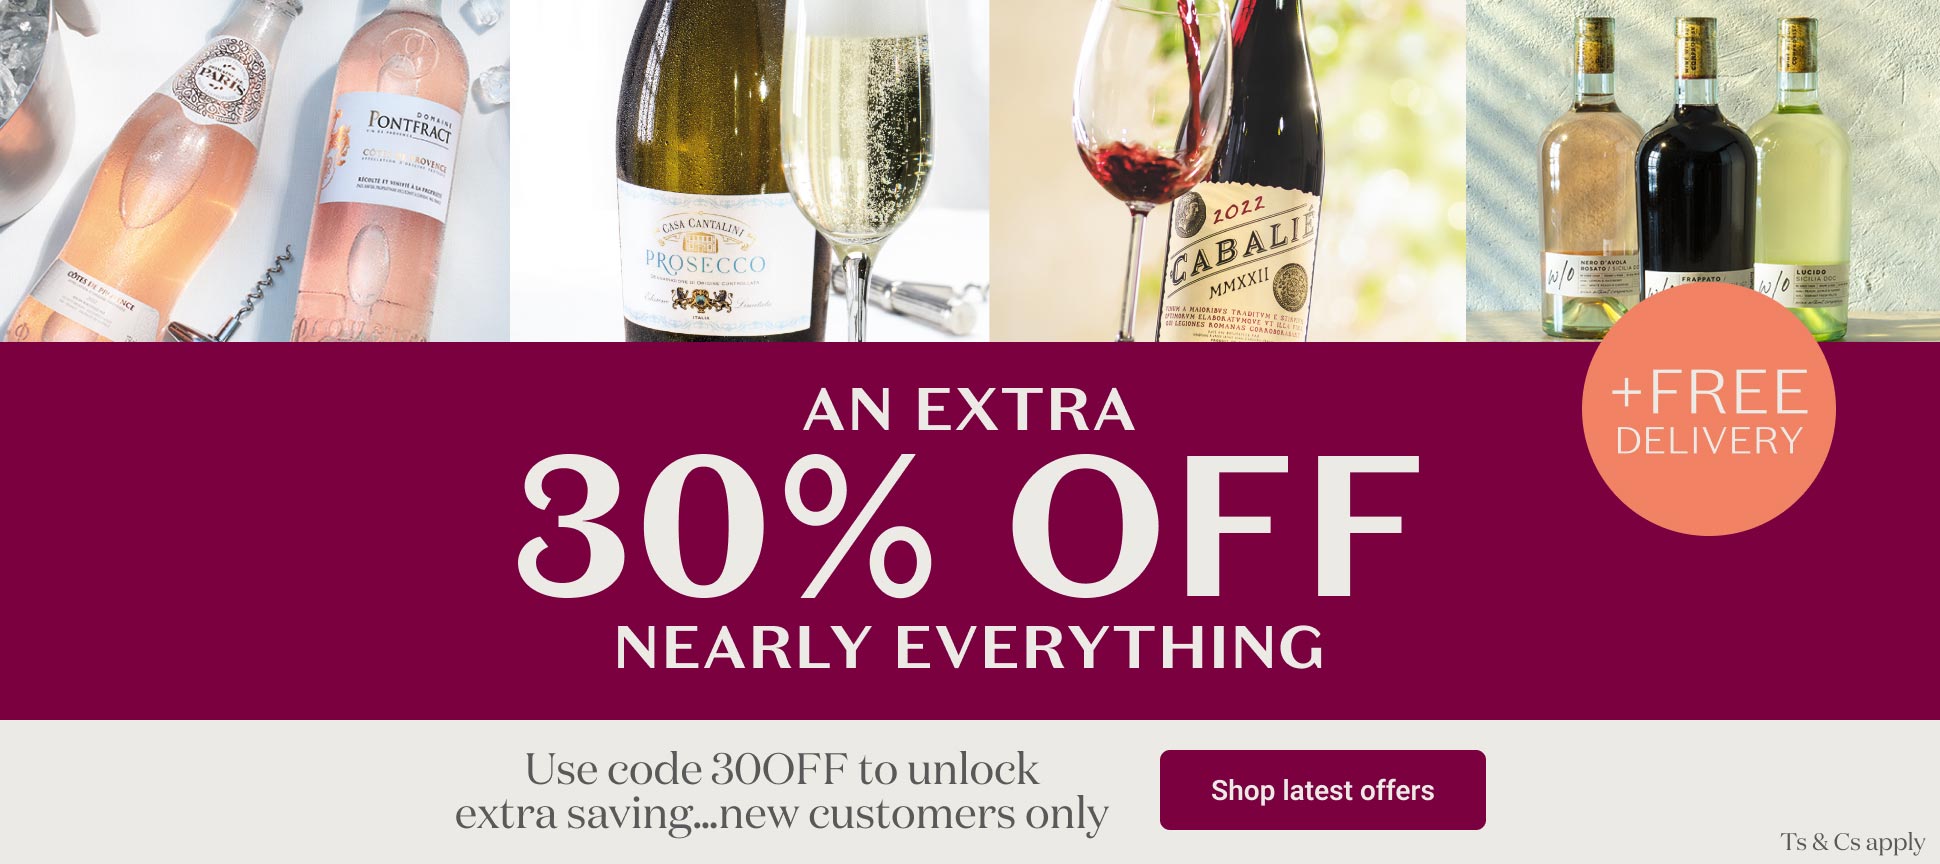 An extra 30% off nearly everything